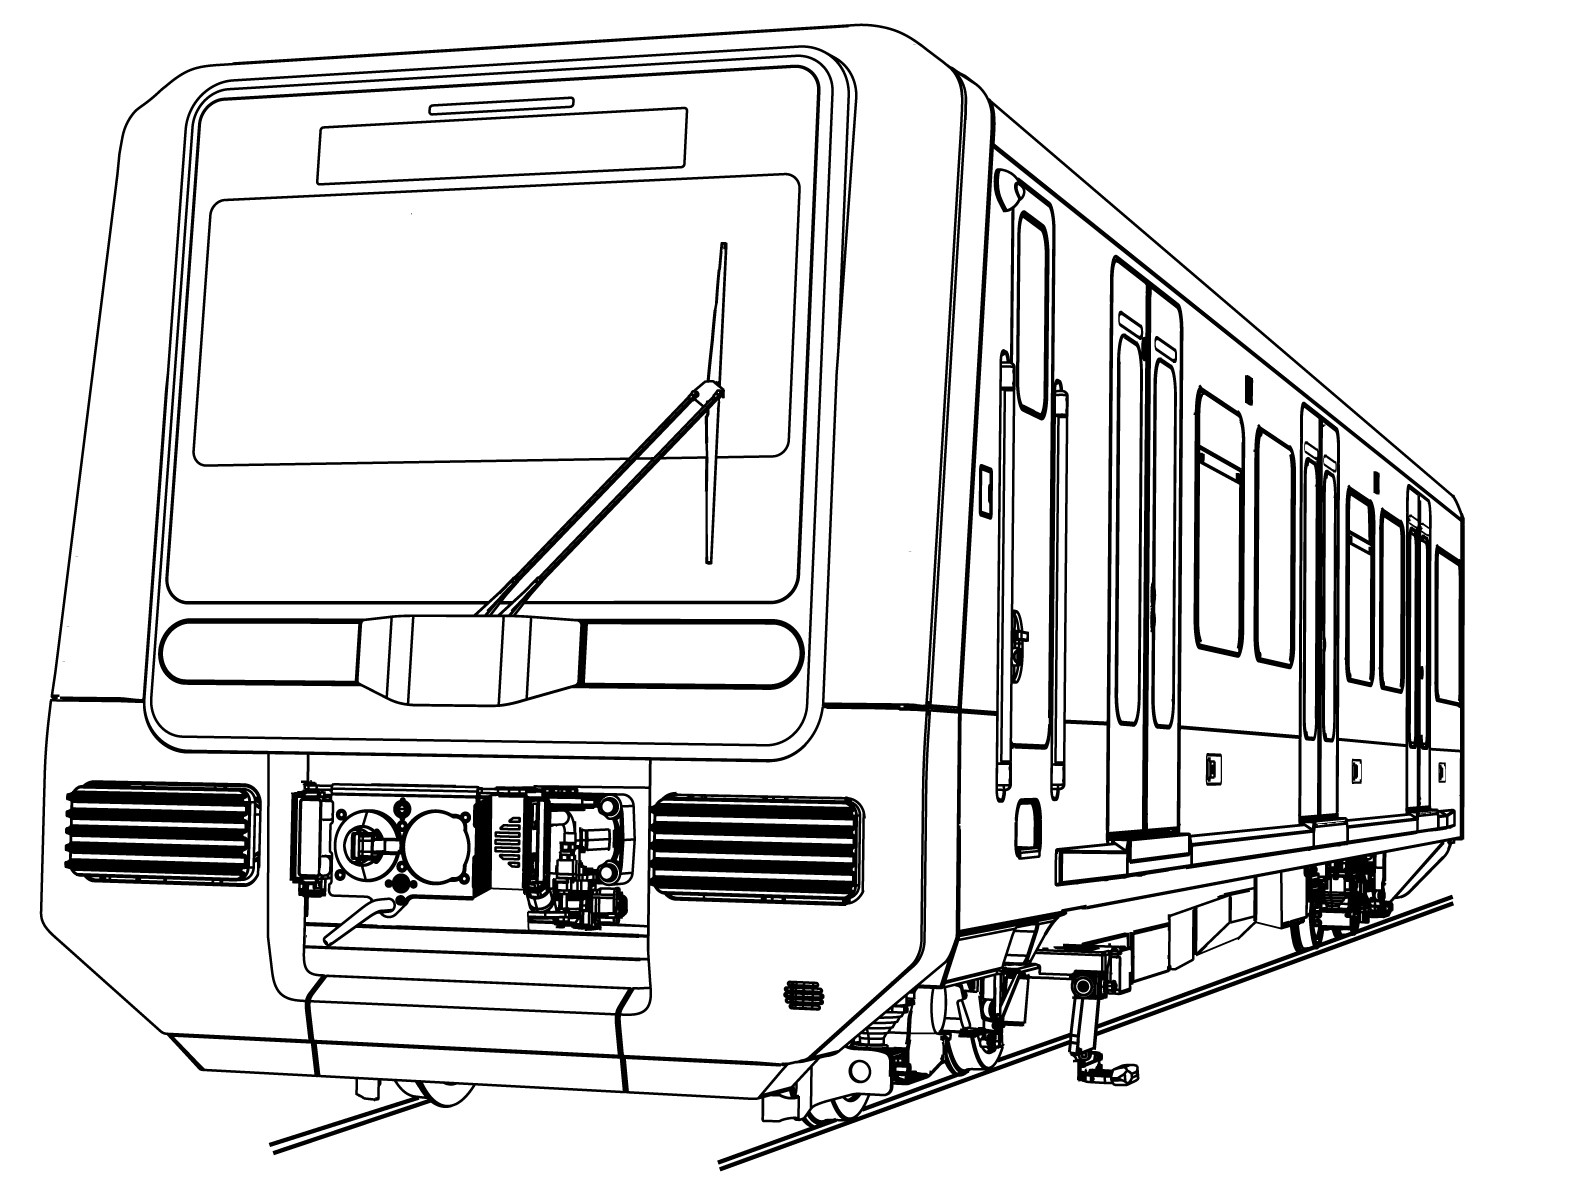 Coloring page train  img 23358  Train drawing Train coloring pages  Train tattoo